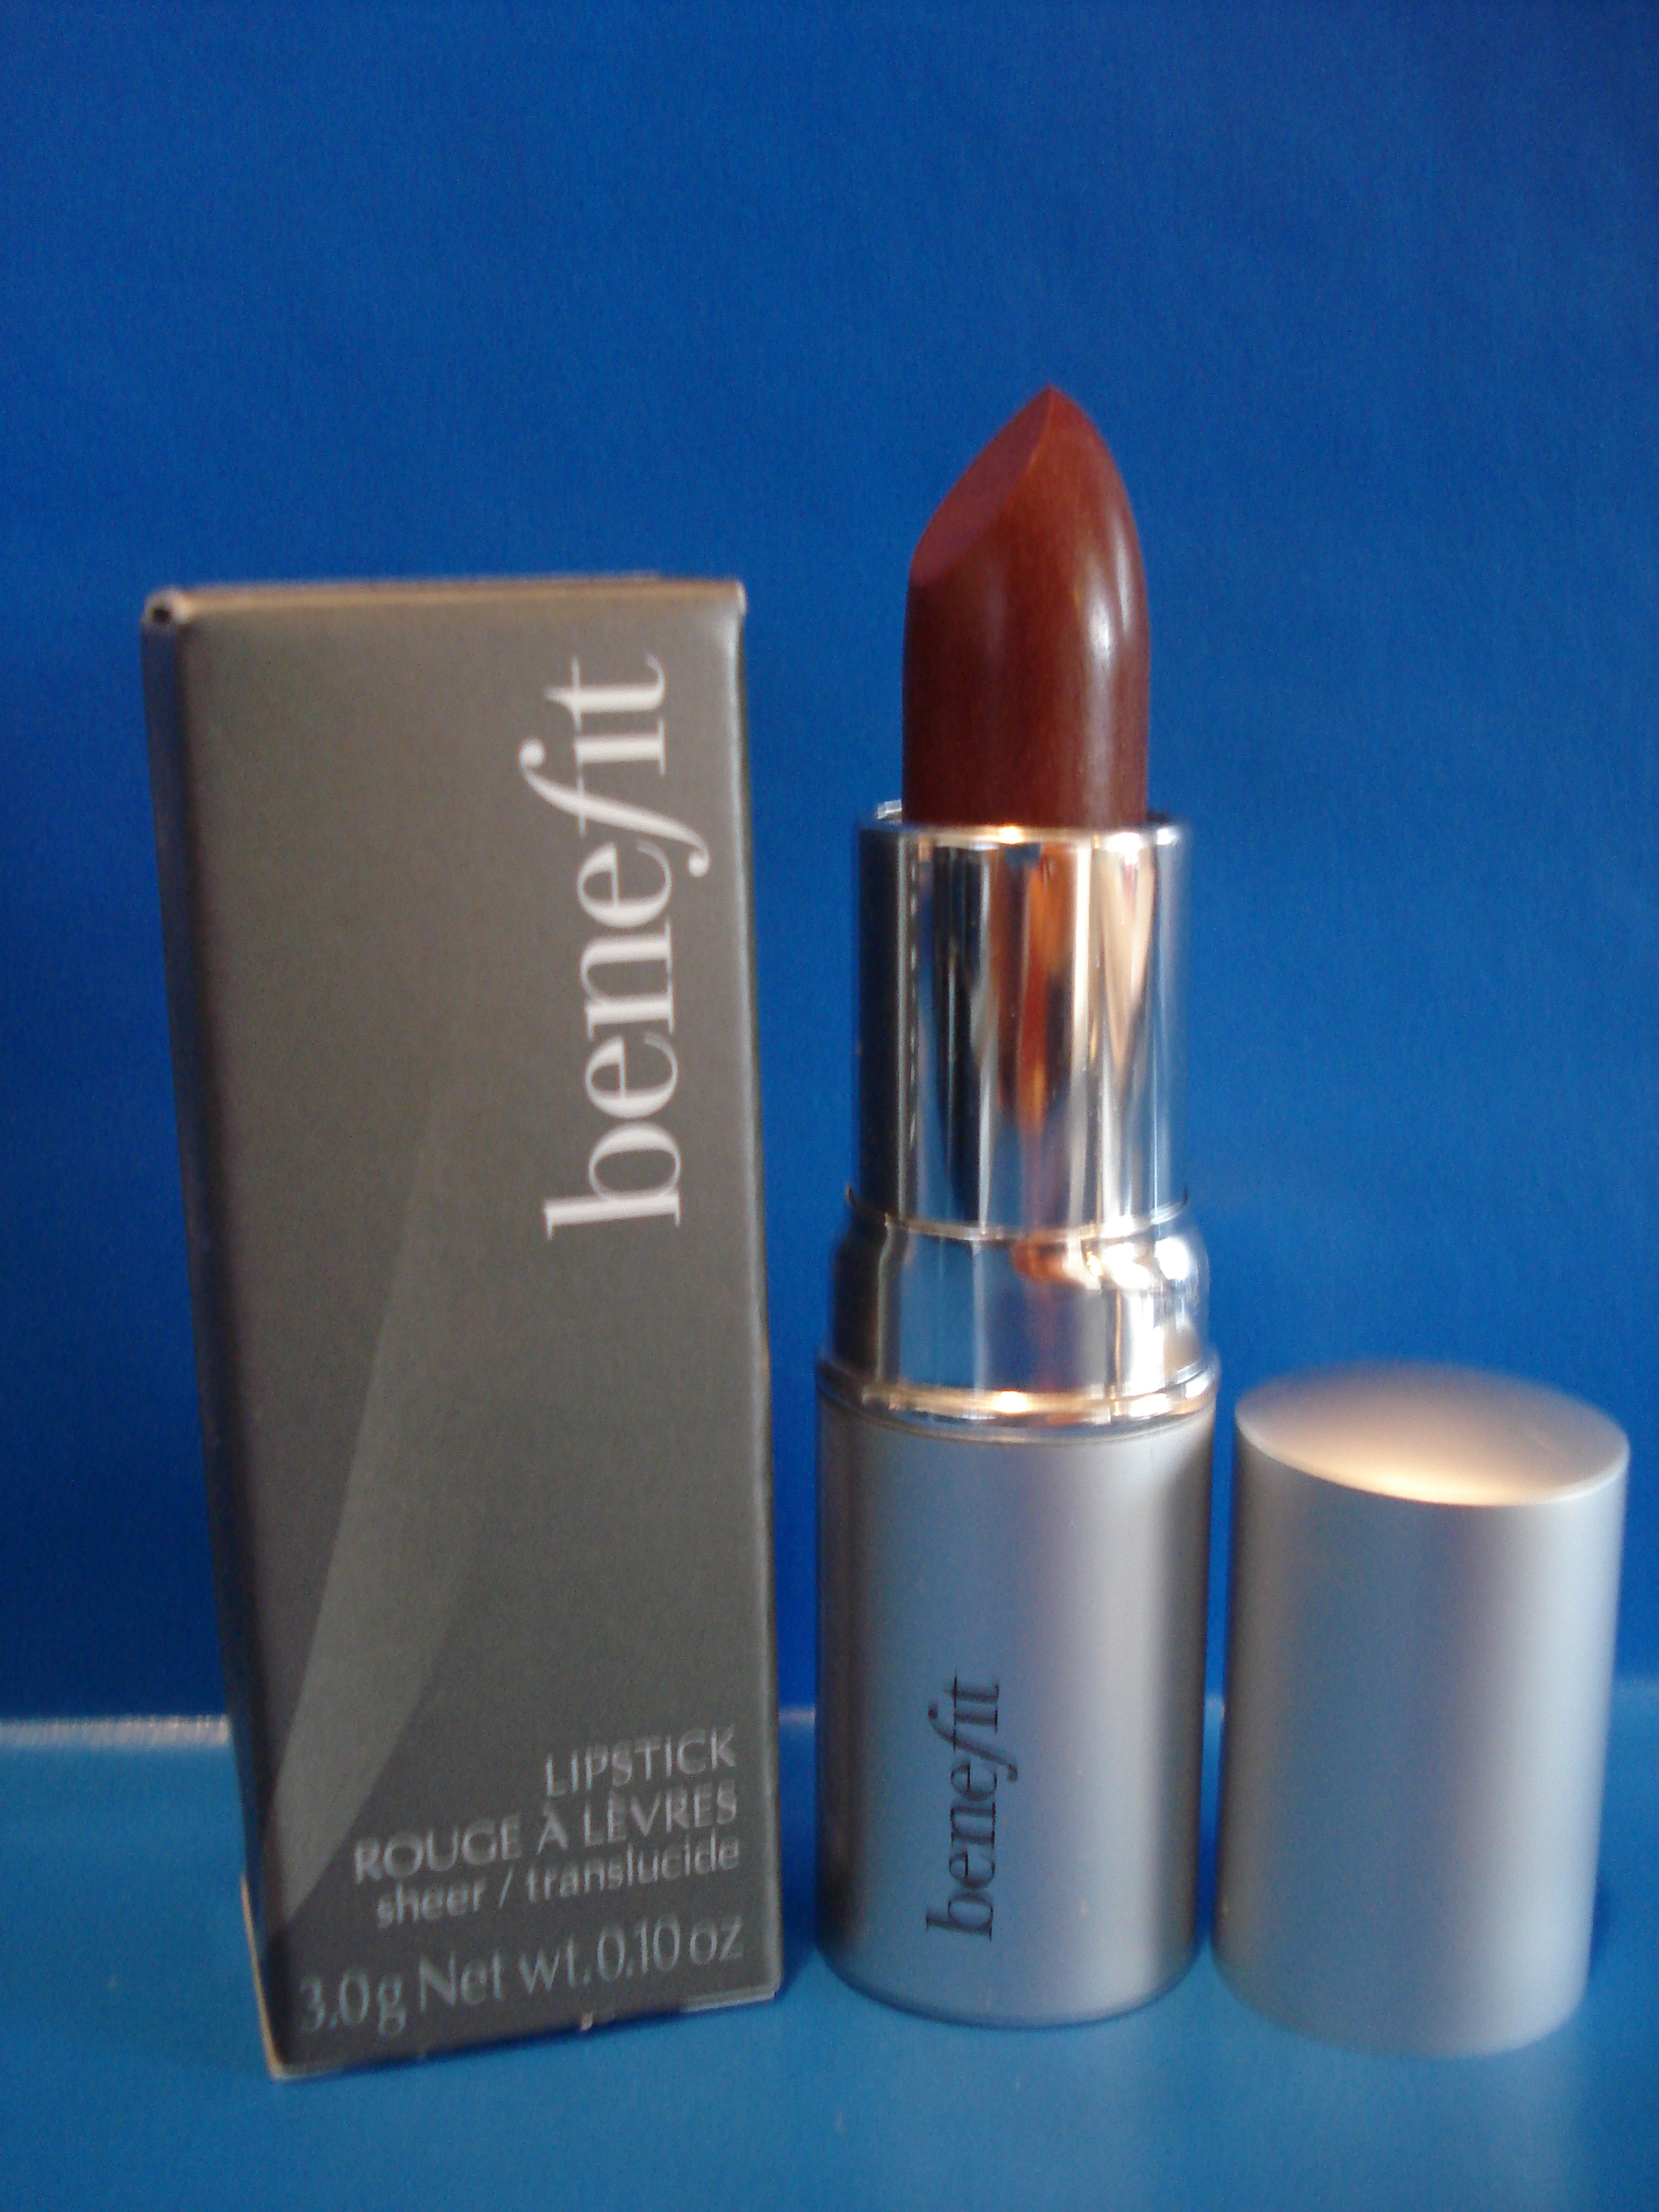 Mineral makeup is made from naturally occurring minerals